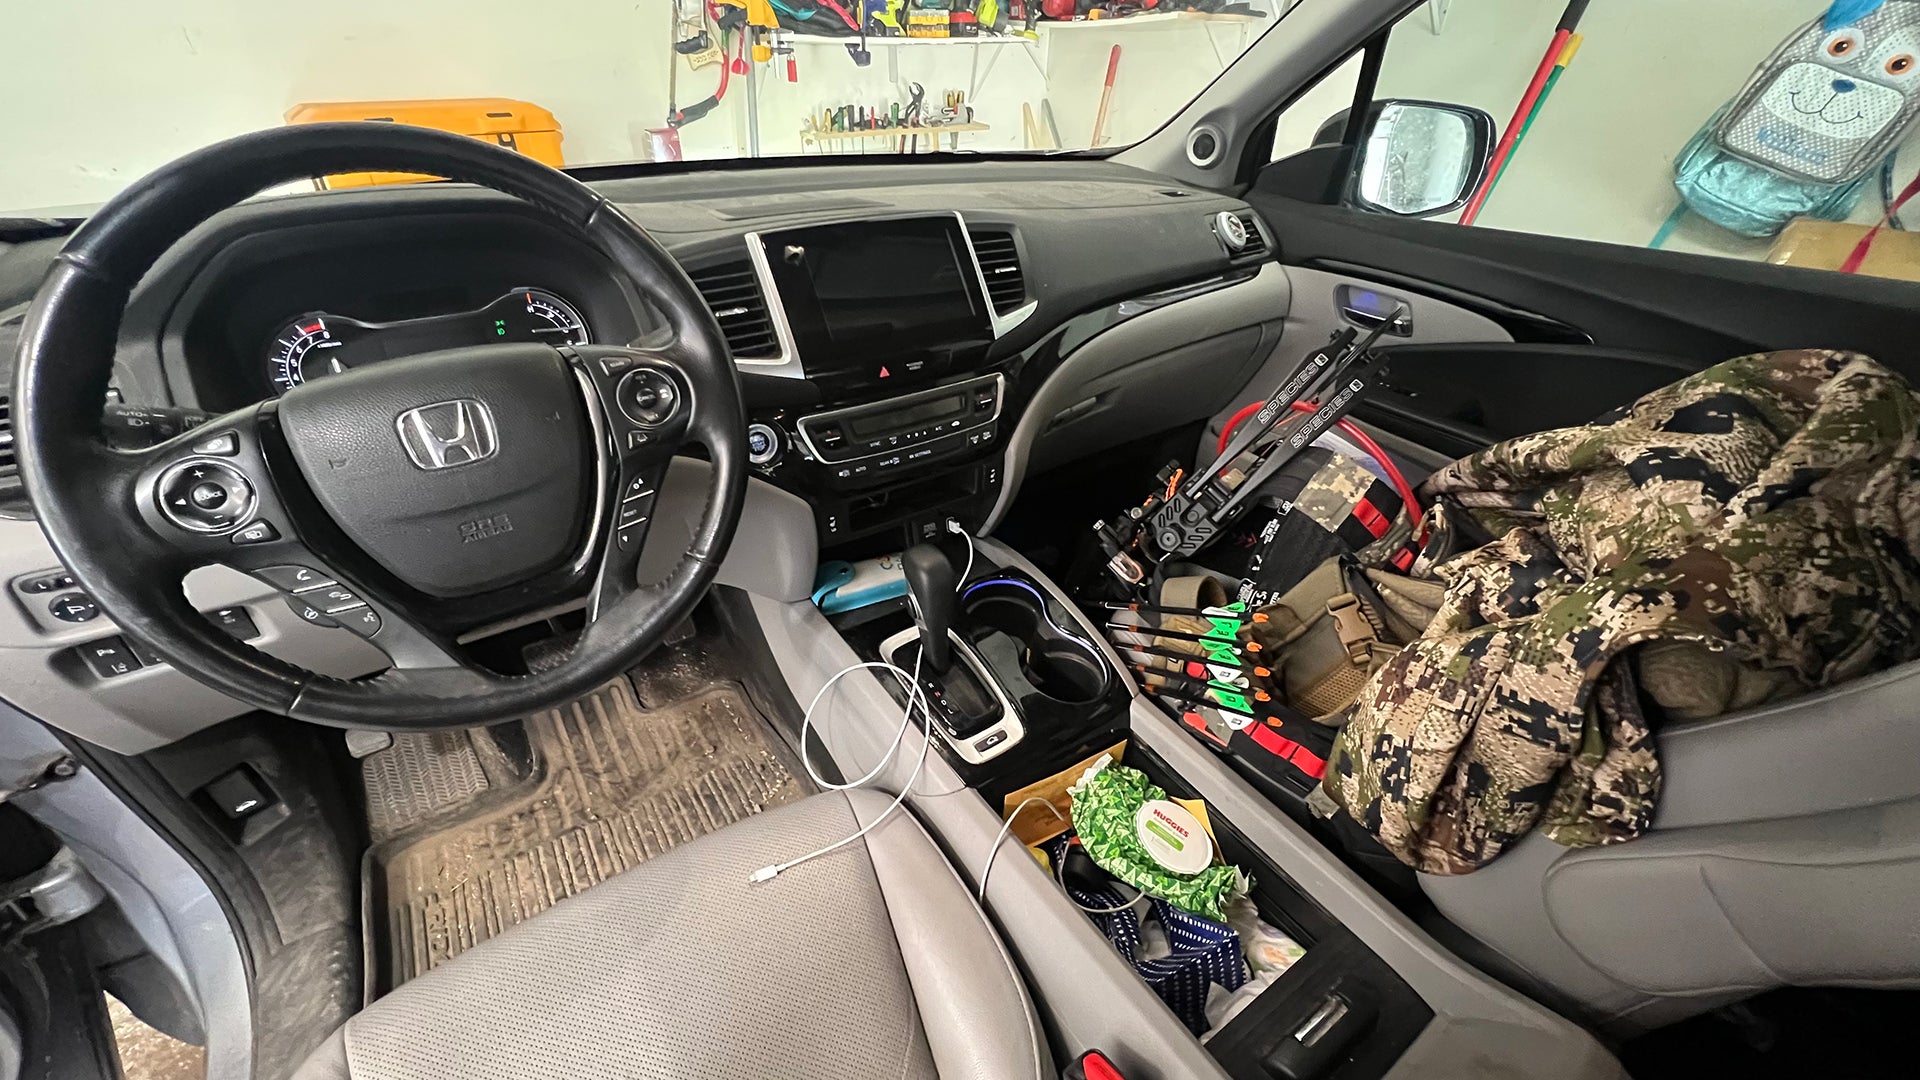 How to Clean a Car Interior?